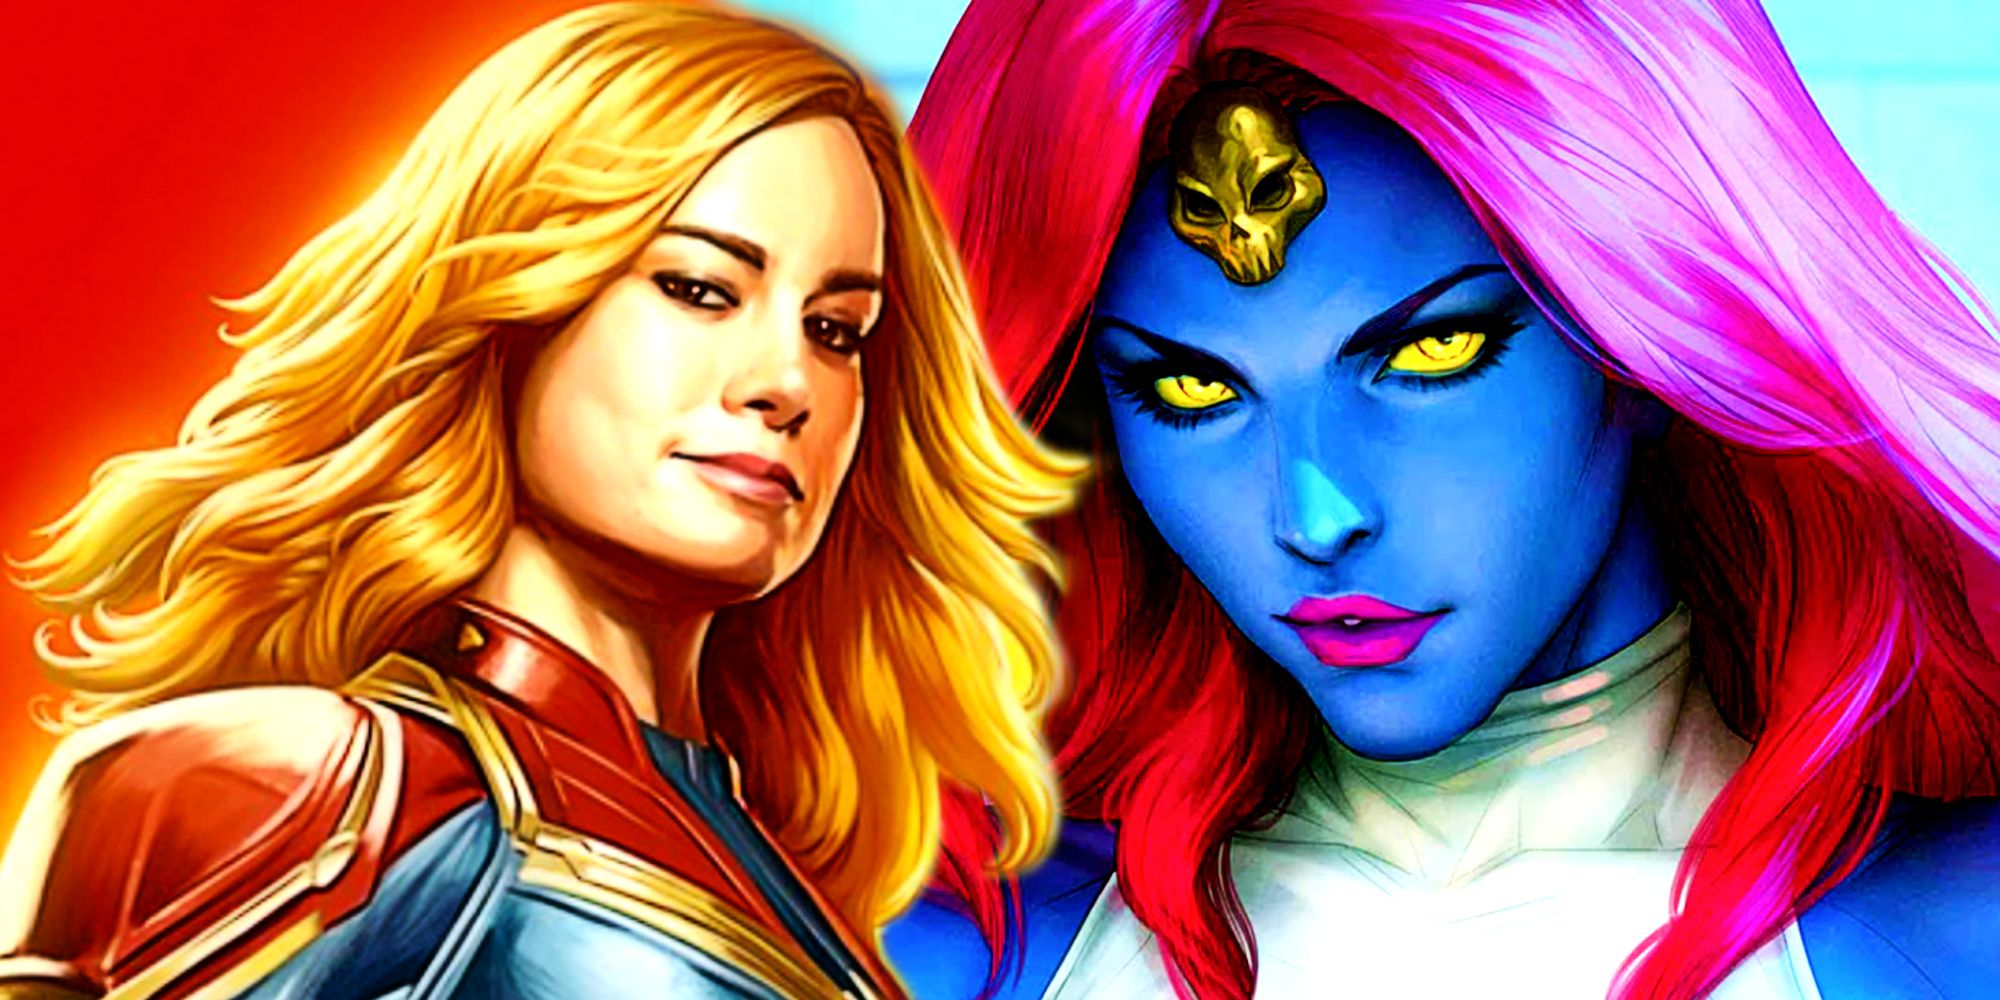 Captain Marvel and Mystique in the MCU